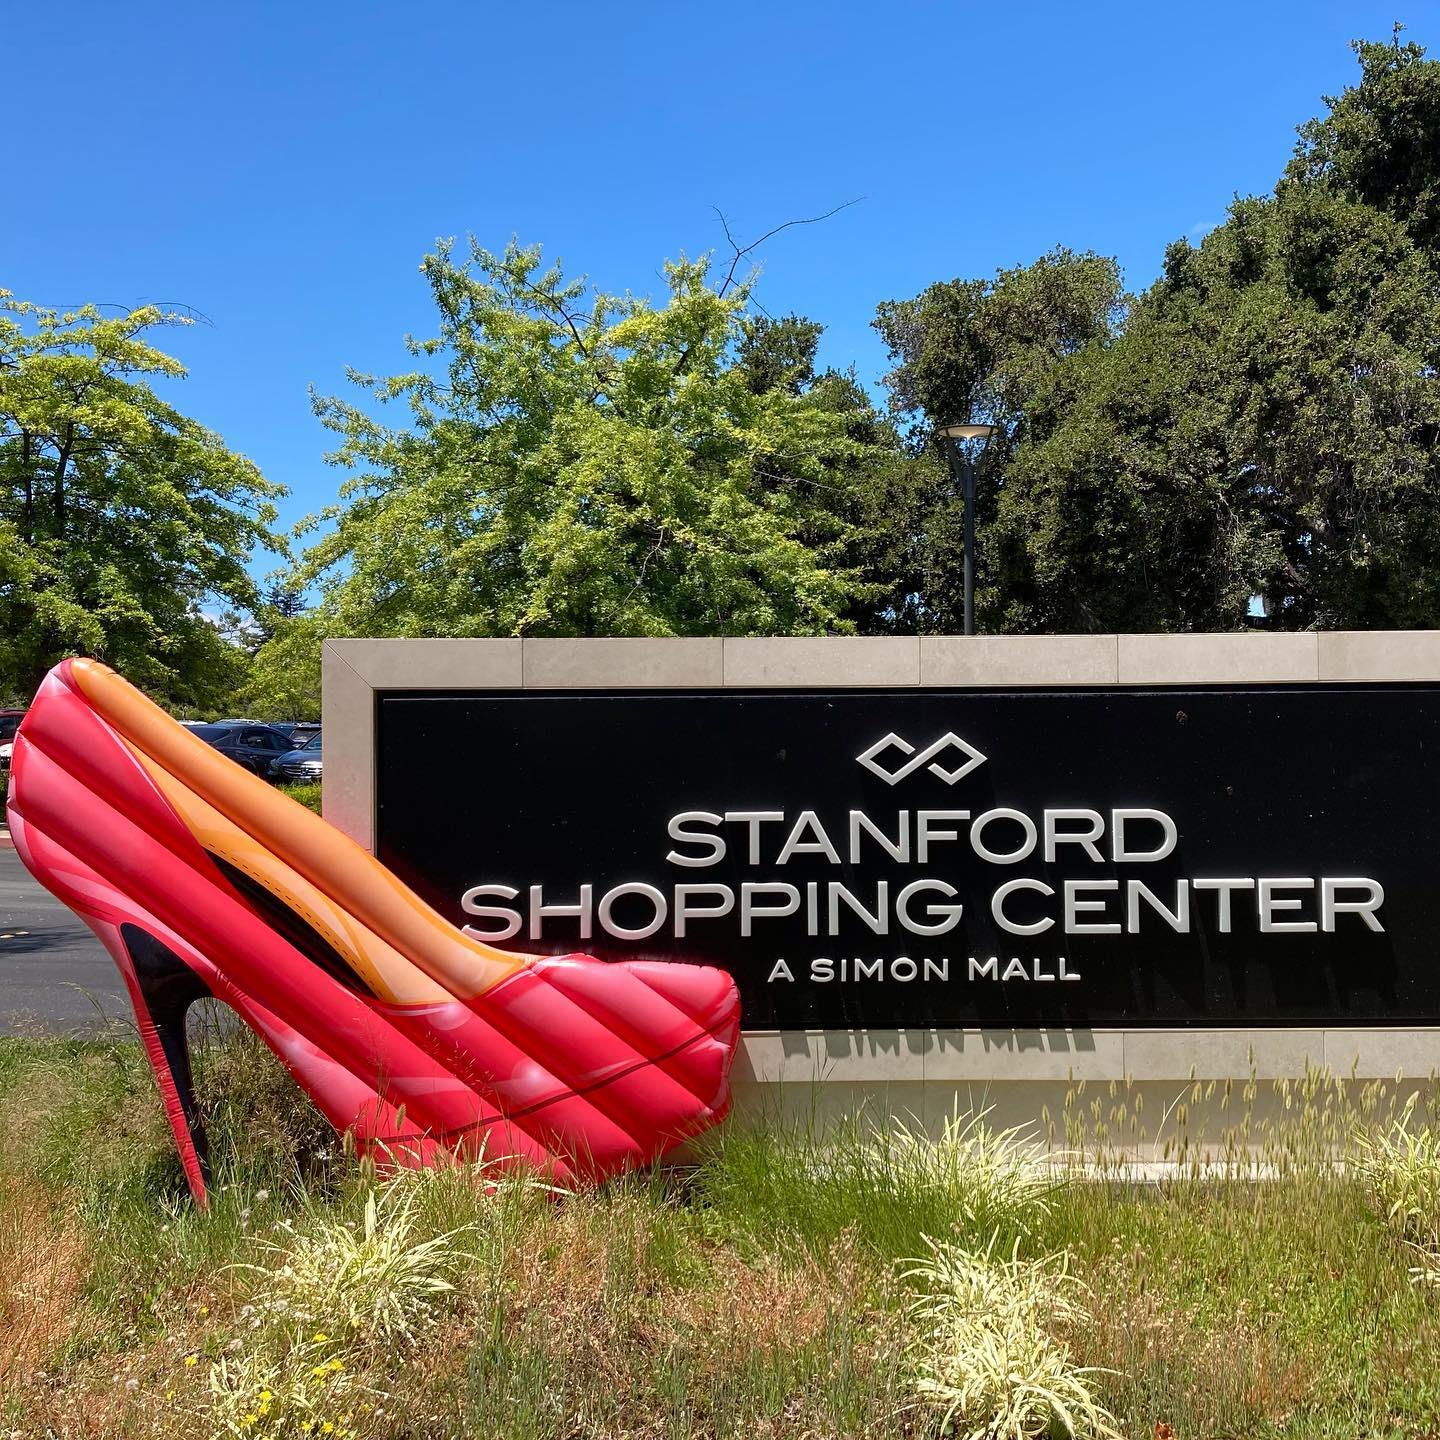 Welcome To Stanford Shopping Center - A Shopping Center In Palo